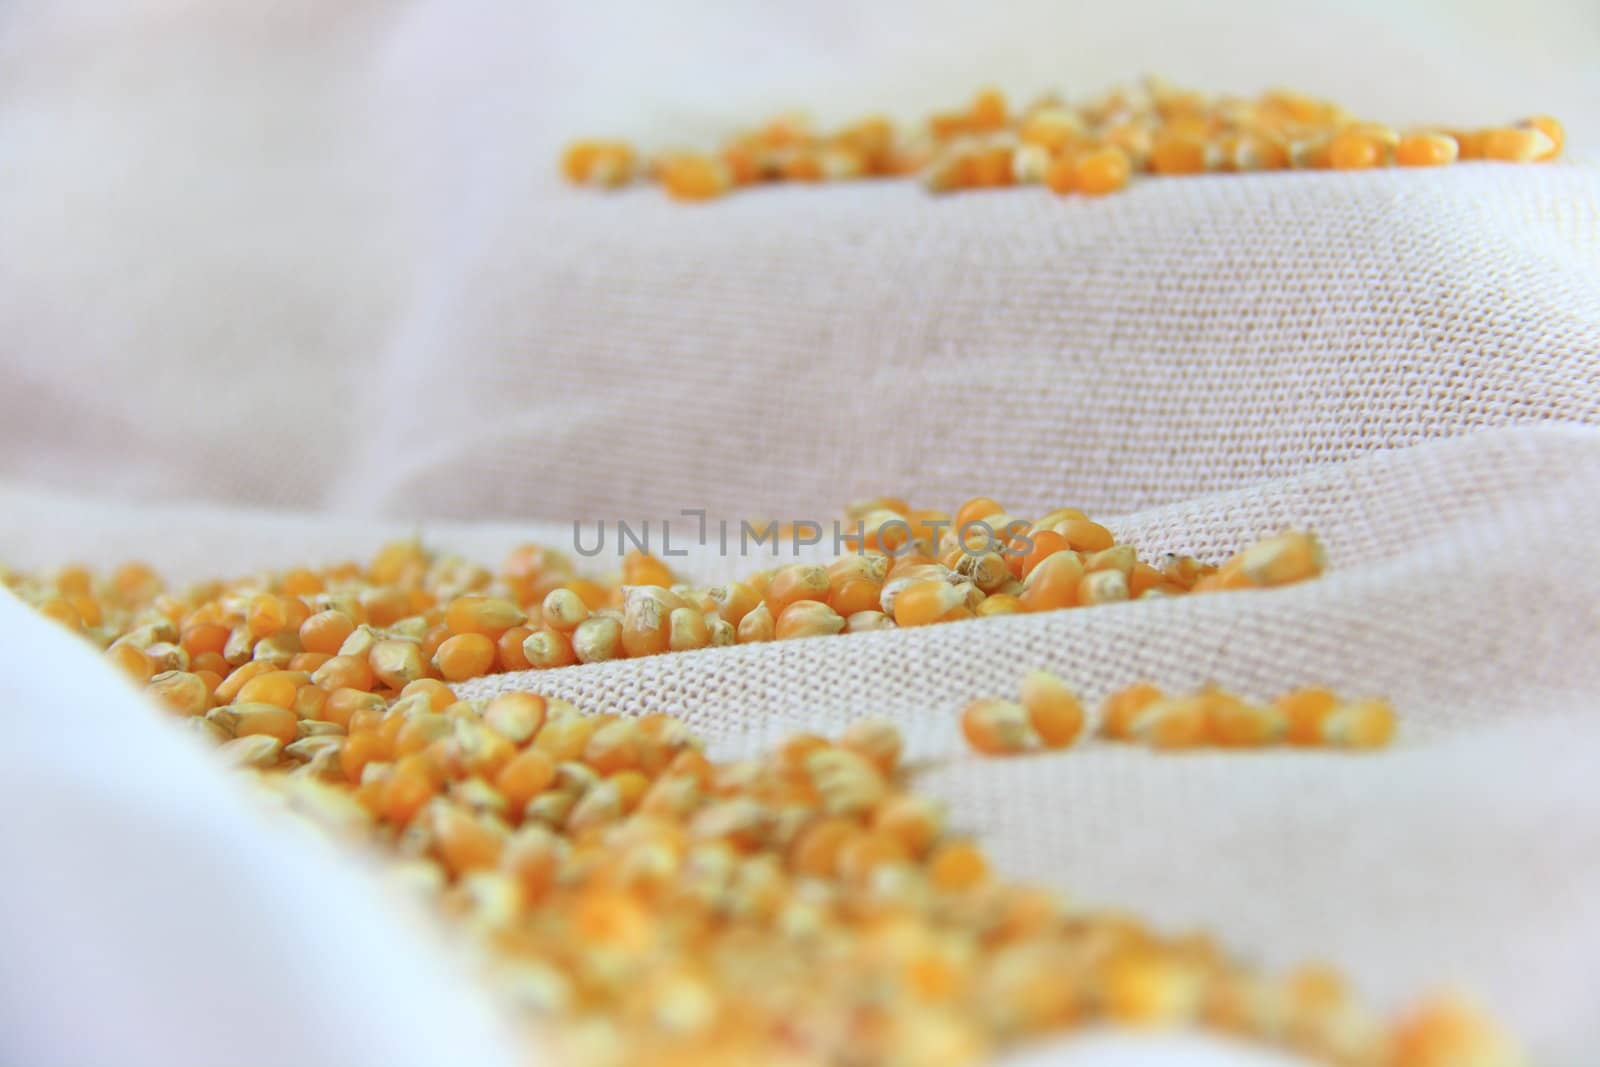 yellow sweet corns on natural cloth in group 